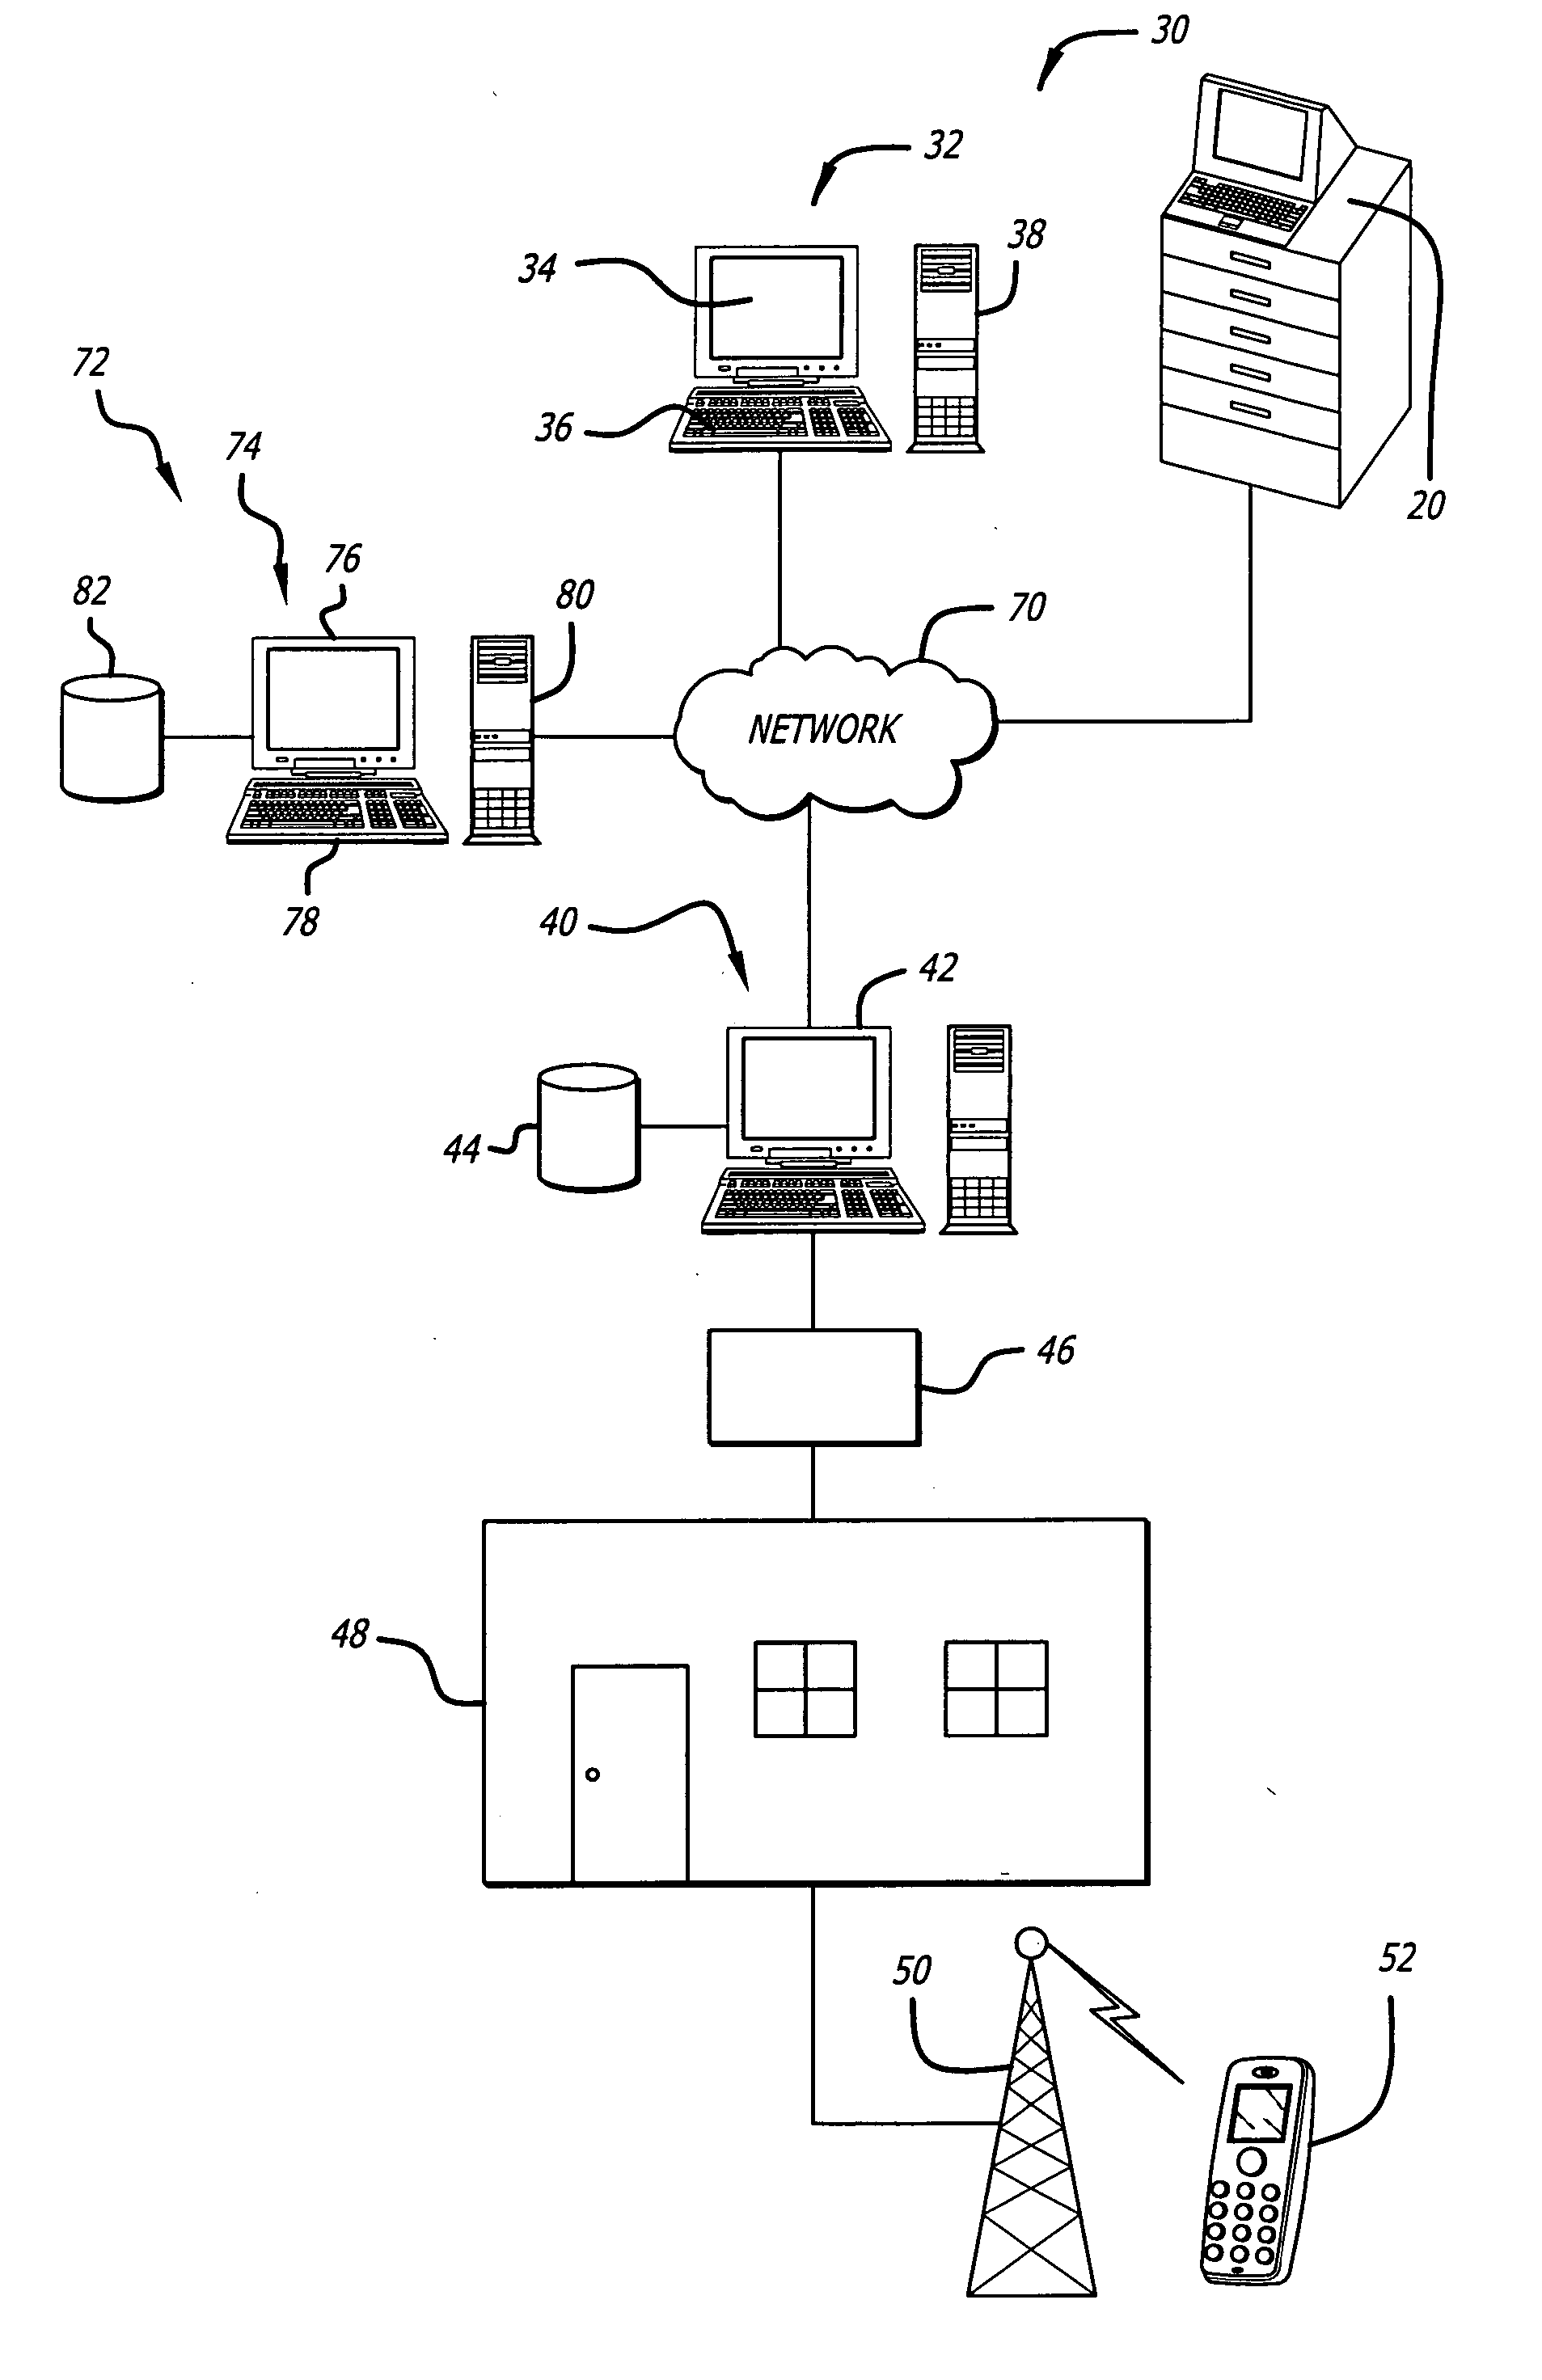 System and method for managing patient care through automated messaging